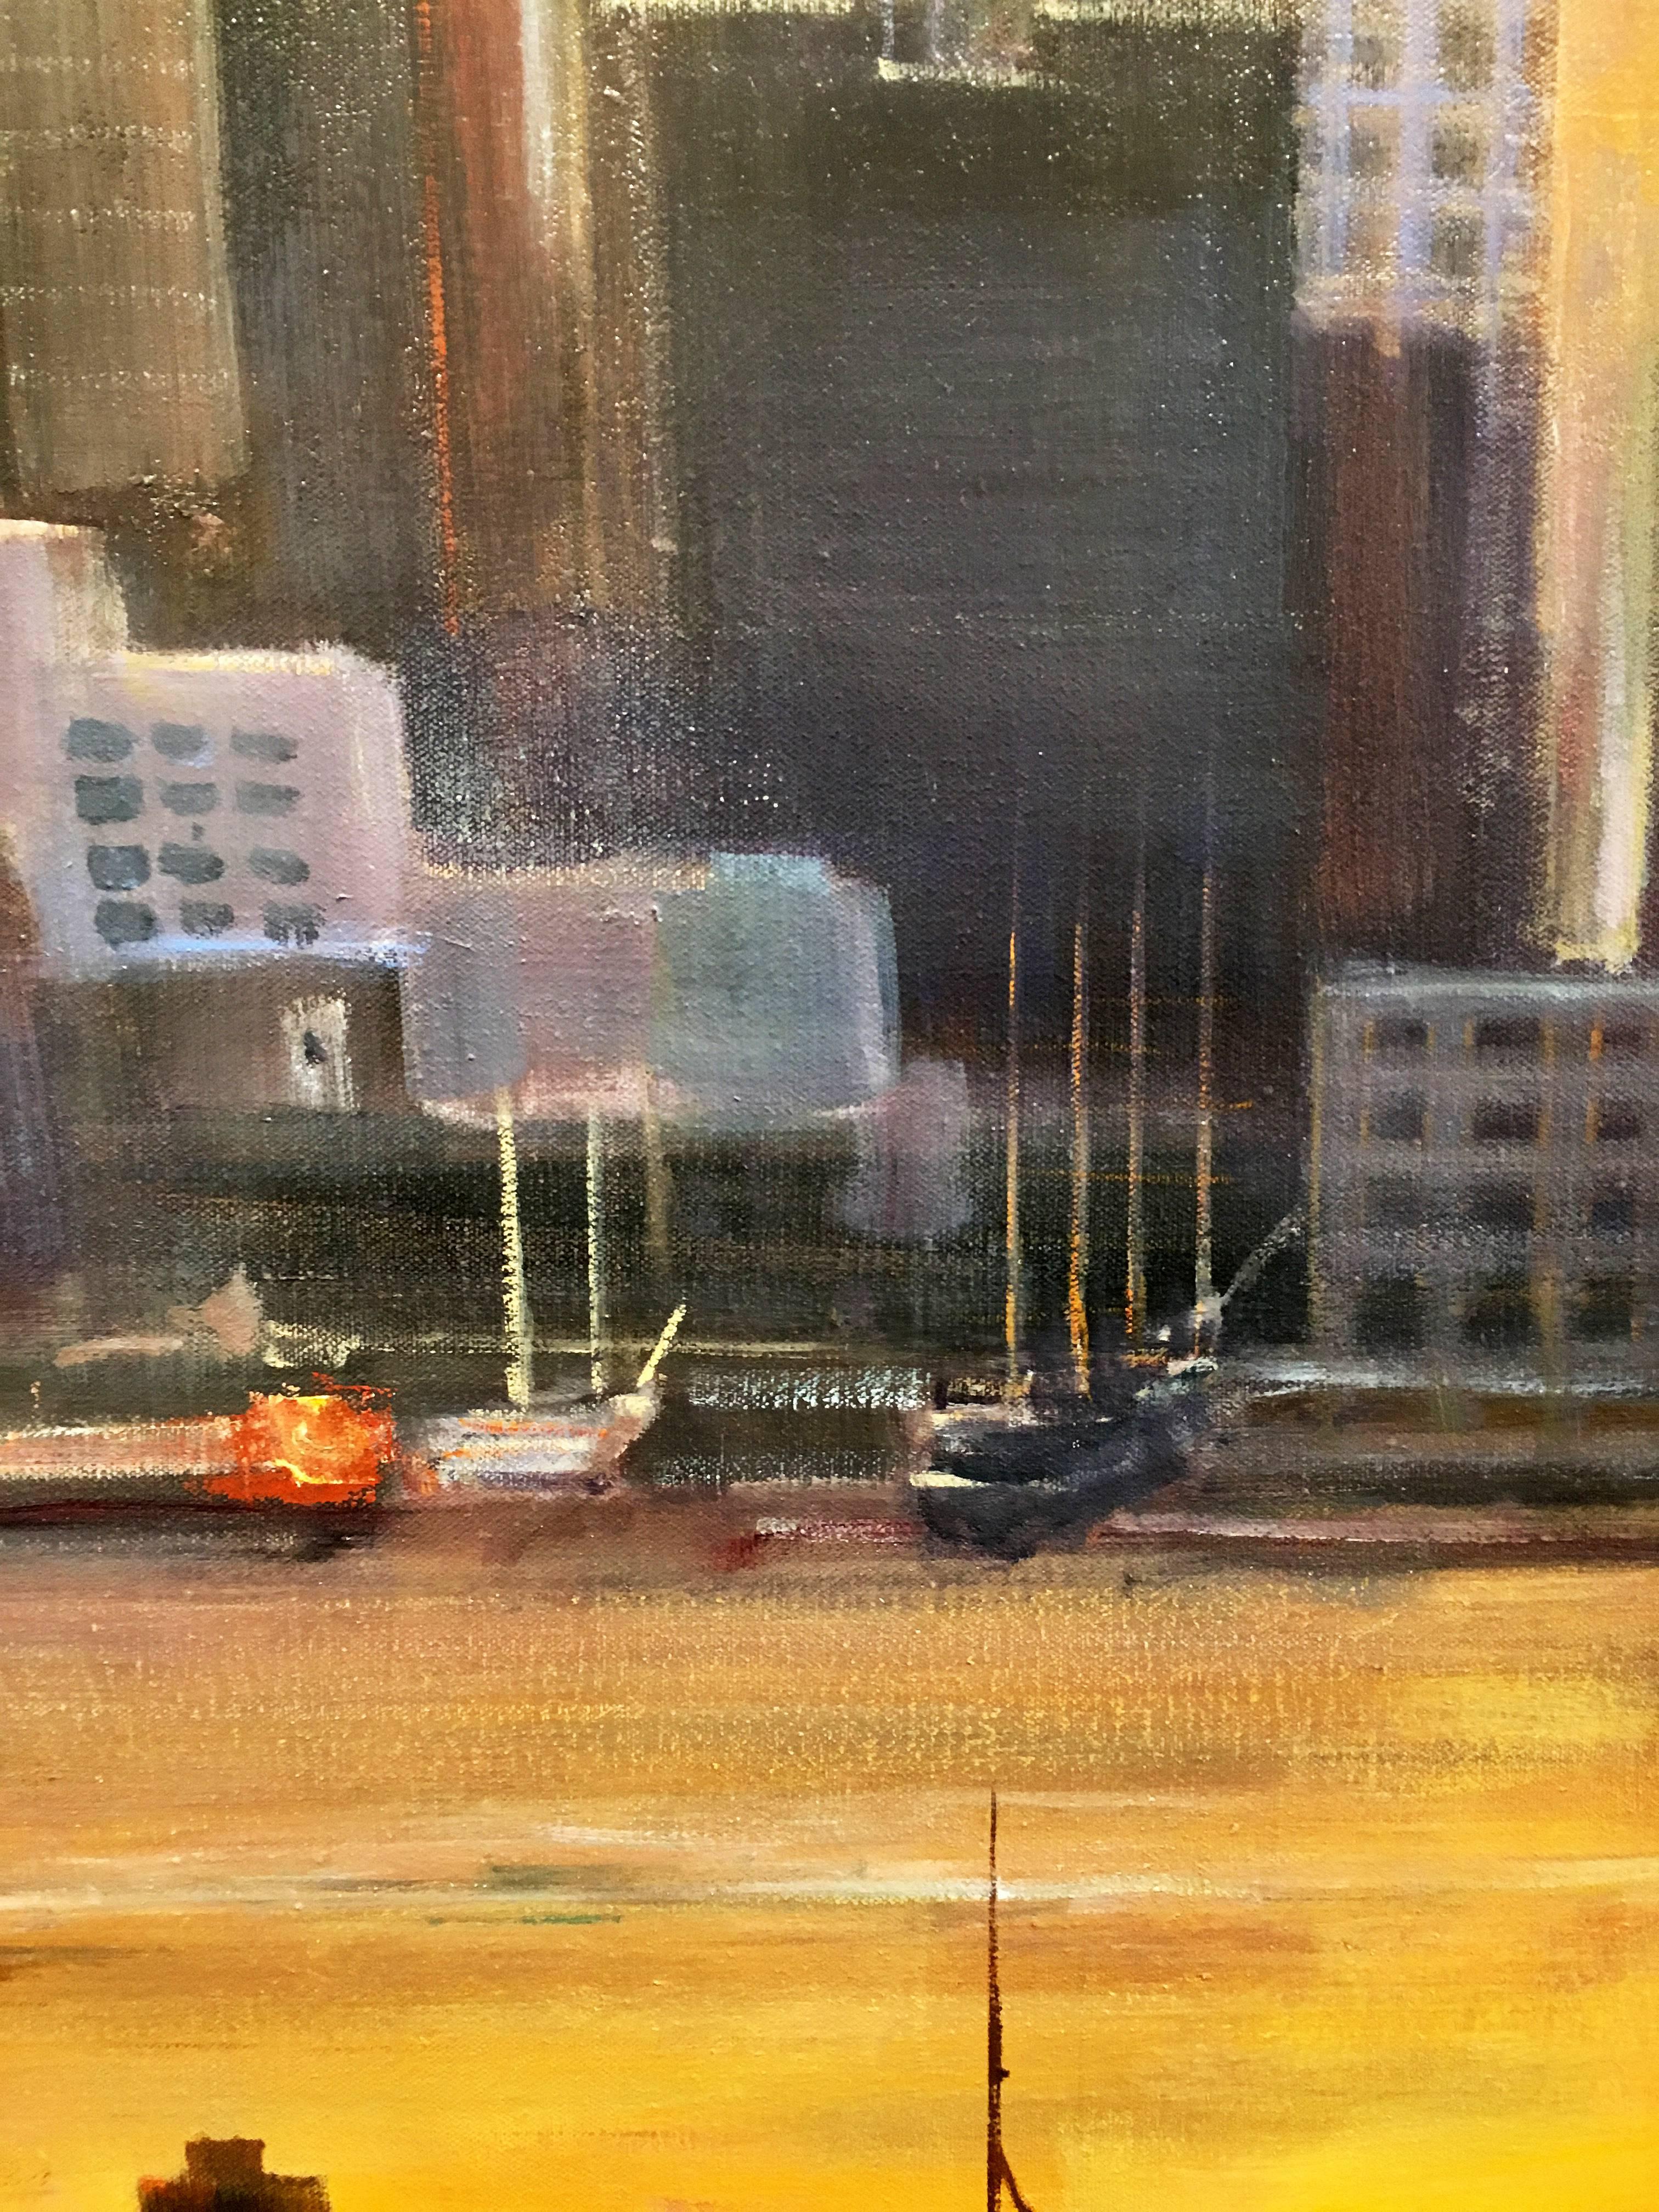 'Downtown Skyline and Tug' 2012 by NY contemporary artist Lawrence Kelsey. Oil on canvas, 42 x 34 in. A painting of downtown New York City in late afternoon in atmospheric hues of orange, purple, gray and black.  This cityscape is framed in a